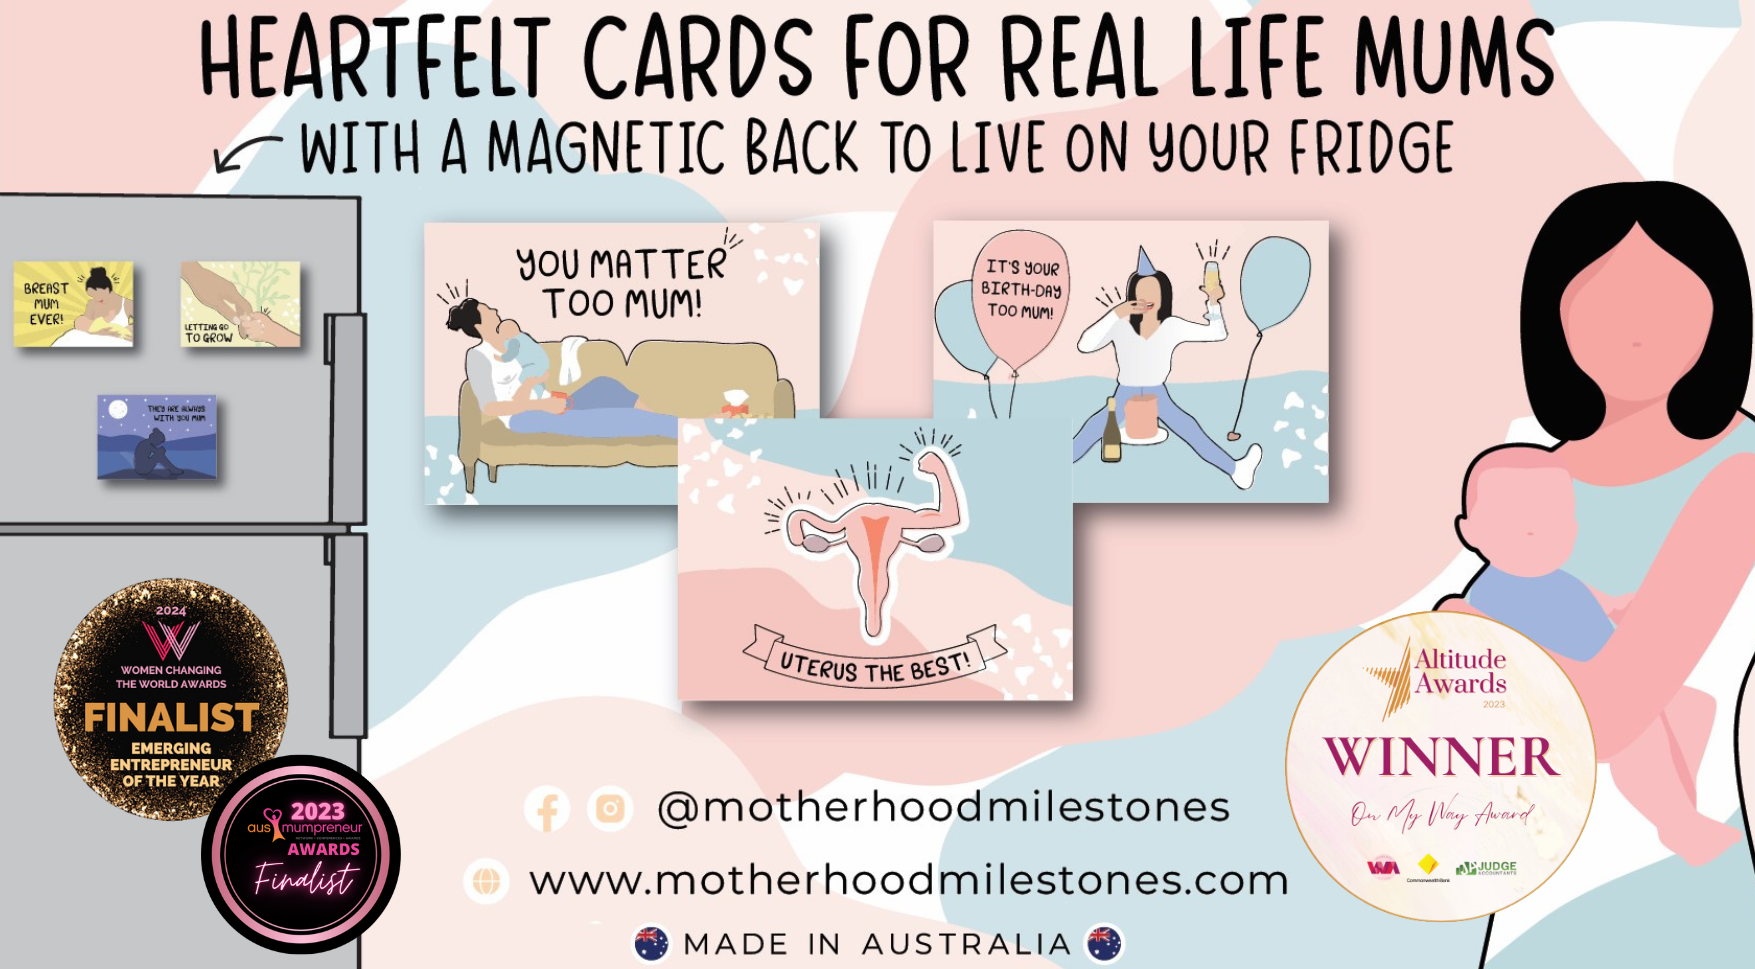 A website banner with the words heartfelt cards for real life mums with a magnetic back to live on your fridge pointing to a fridge with a range of motherhood milestones cards on the fridge and in larger format in the middle of the banner. There is also an image of a mother holding a baby, contact details and award banners. 